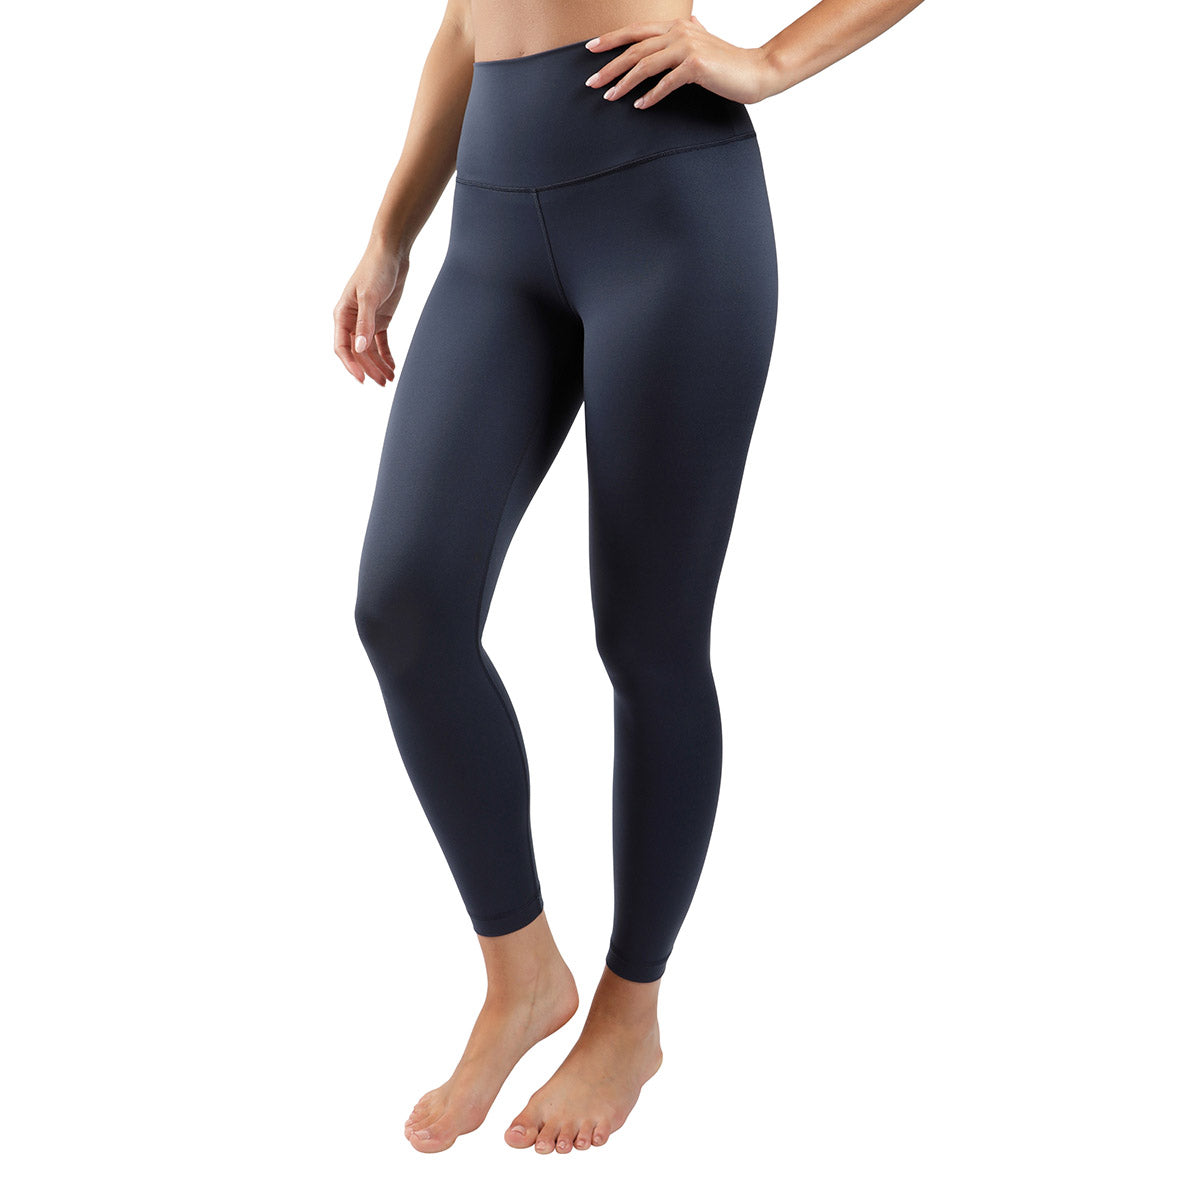 Yogalicious High Waist Ultra Soft 7/8 Ankle Length Leggings with